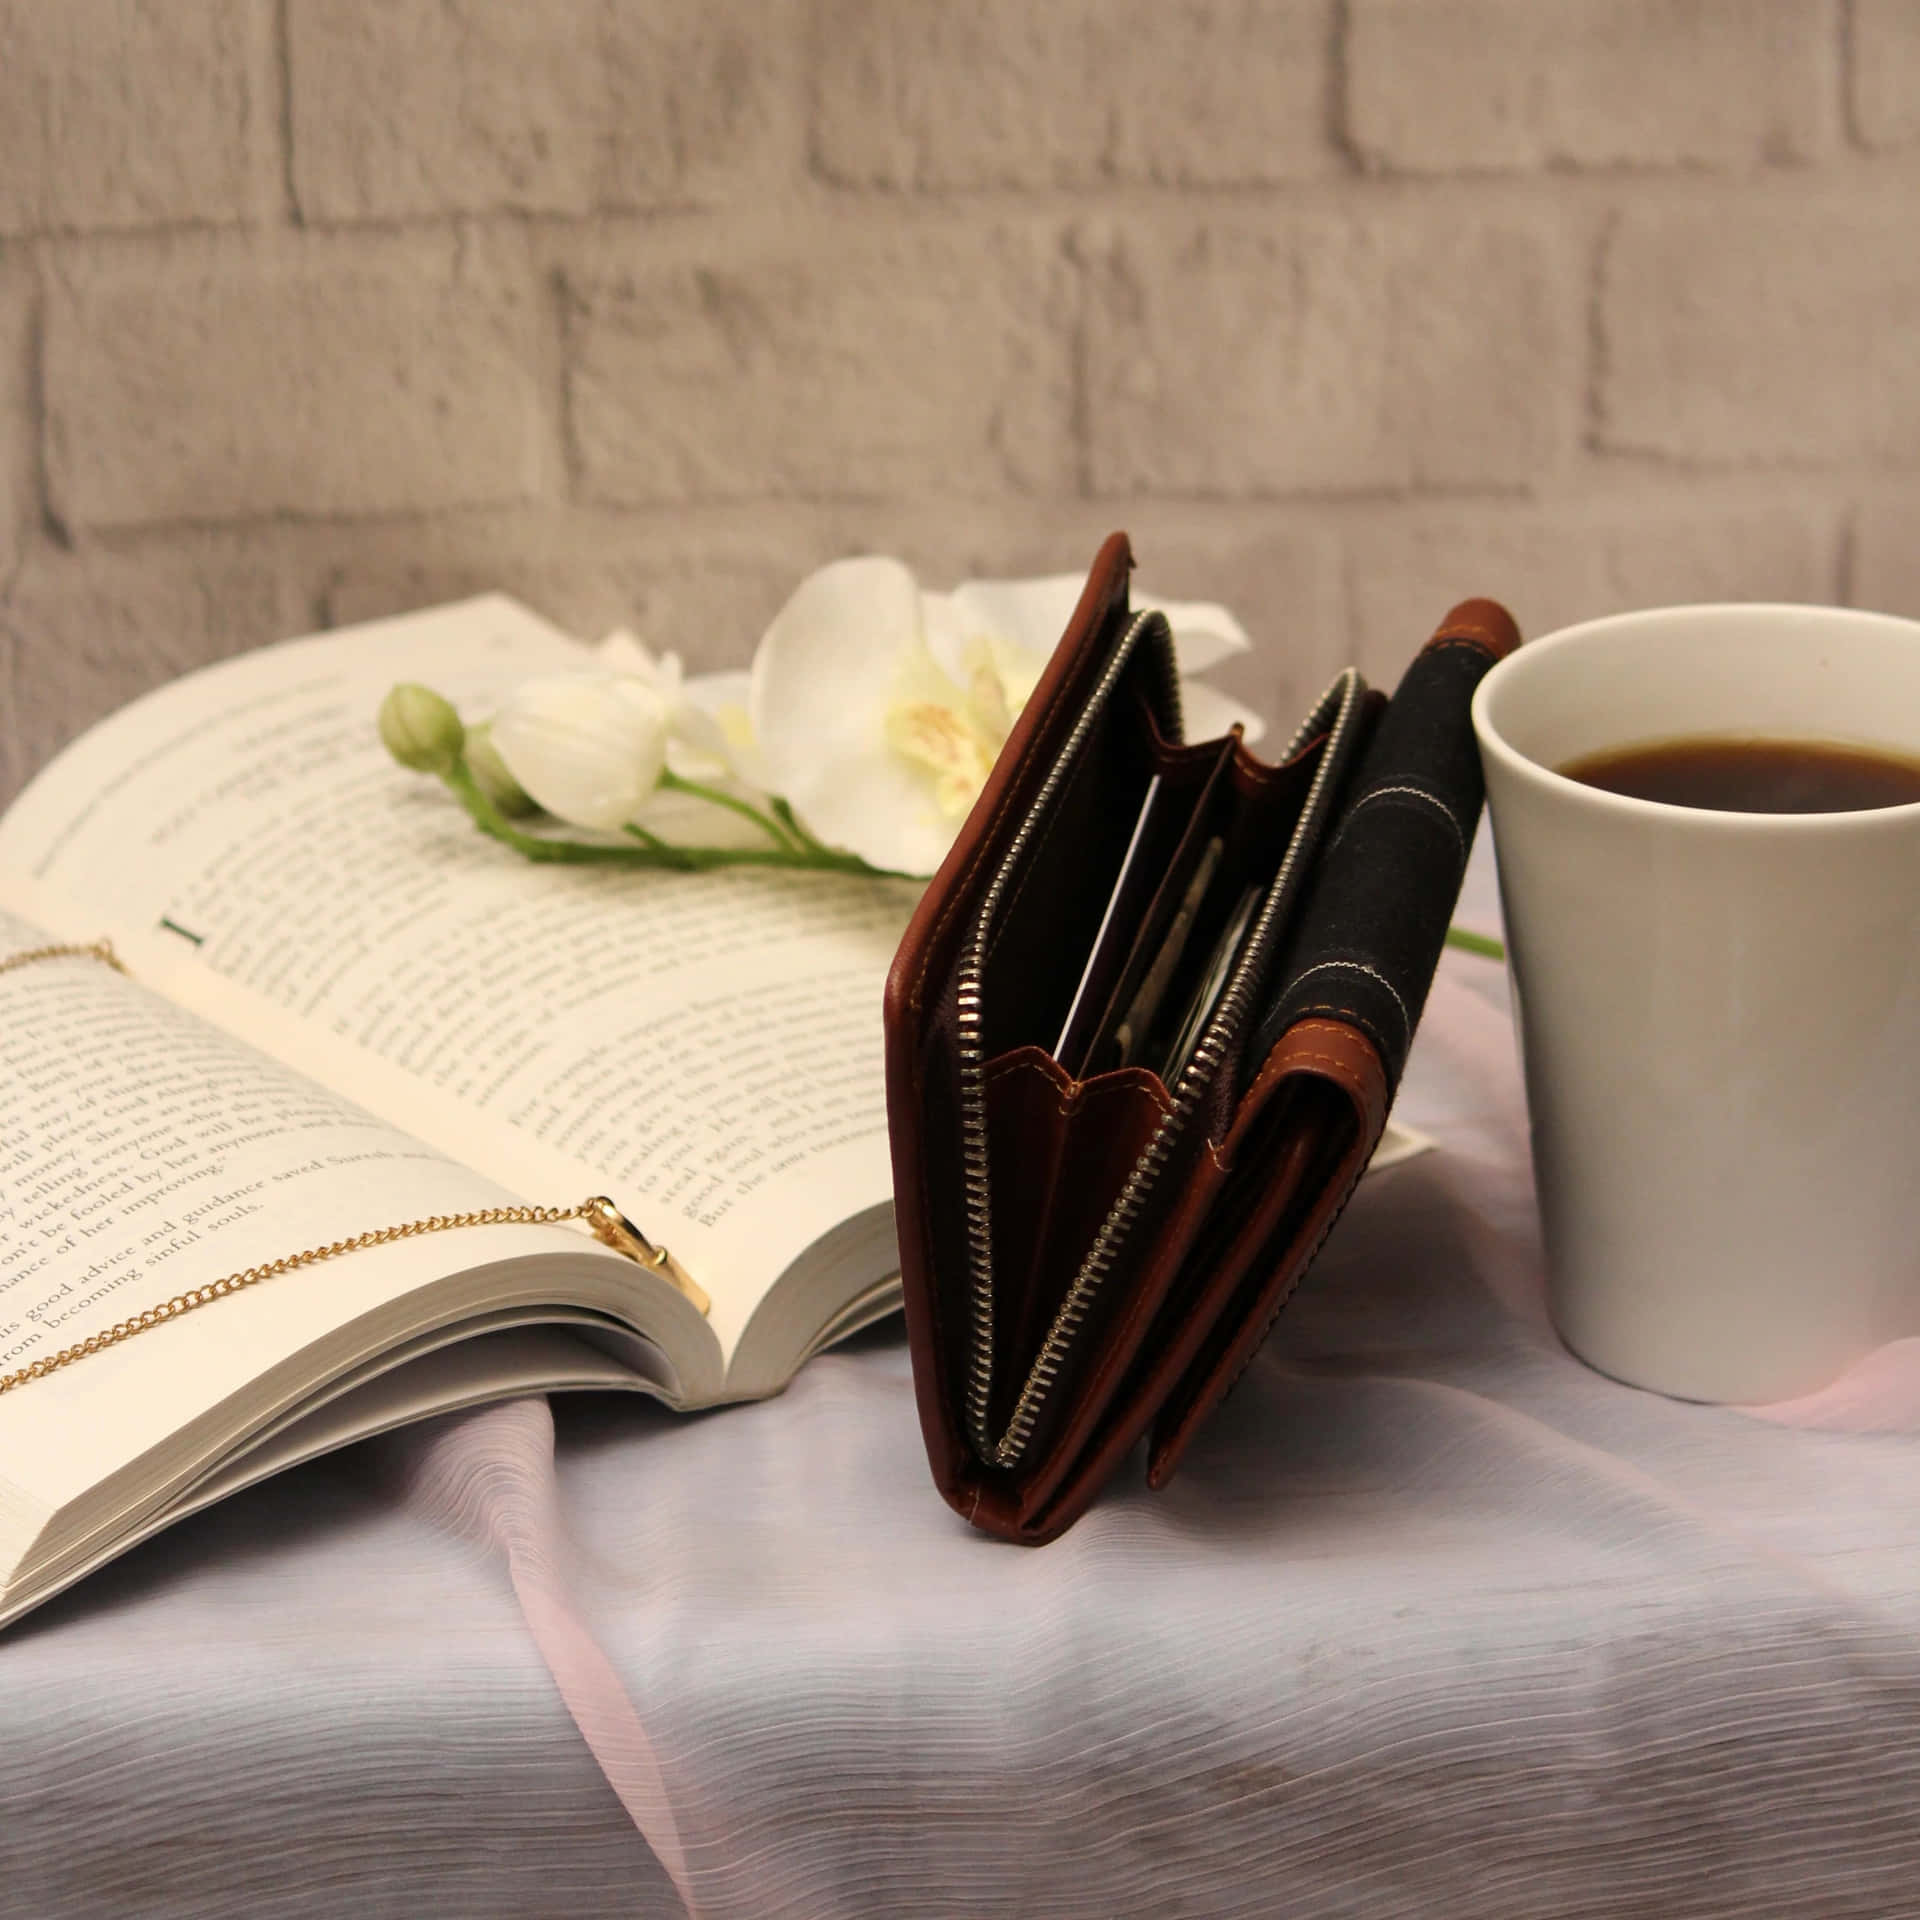 Leather Wallet Book Coffee Setup Wallpaper